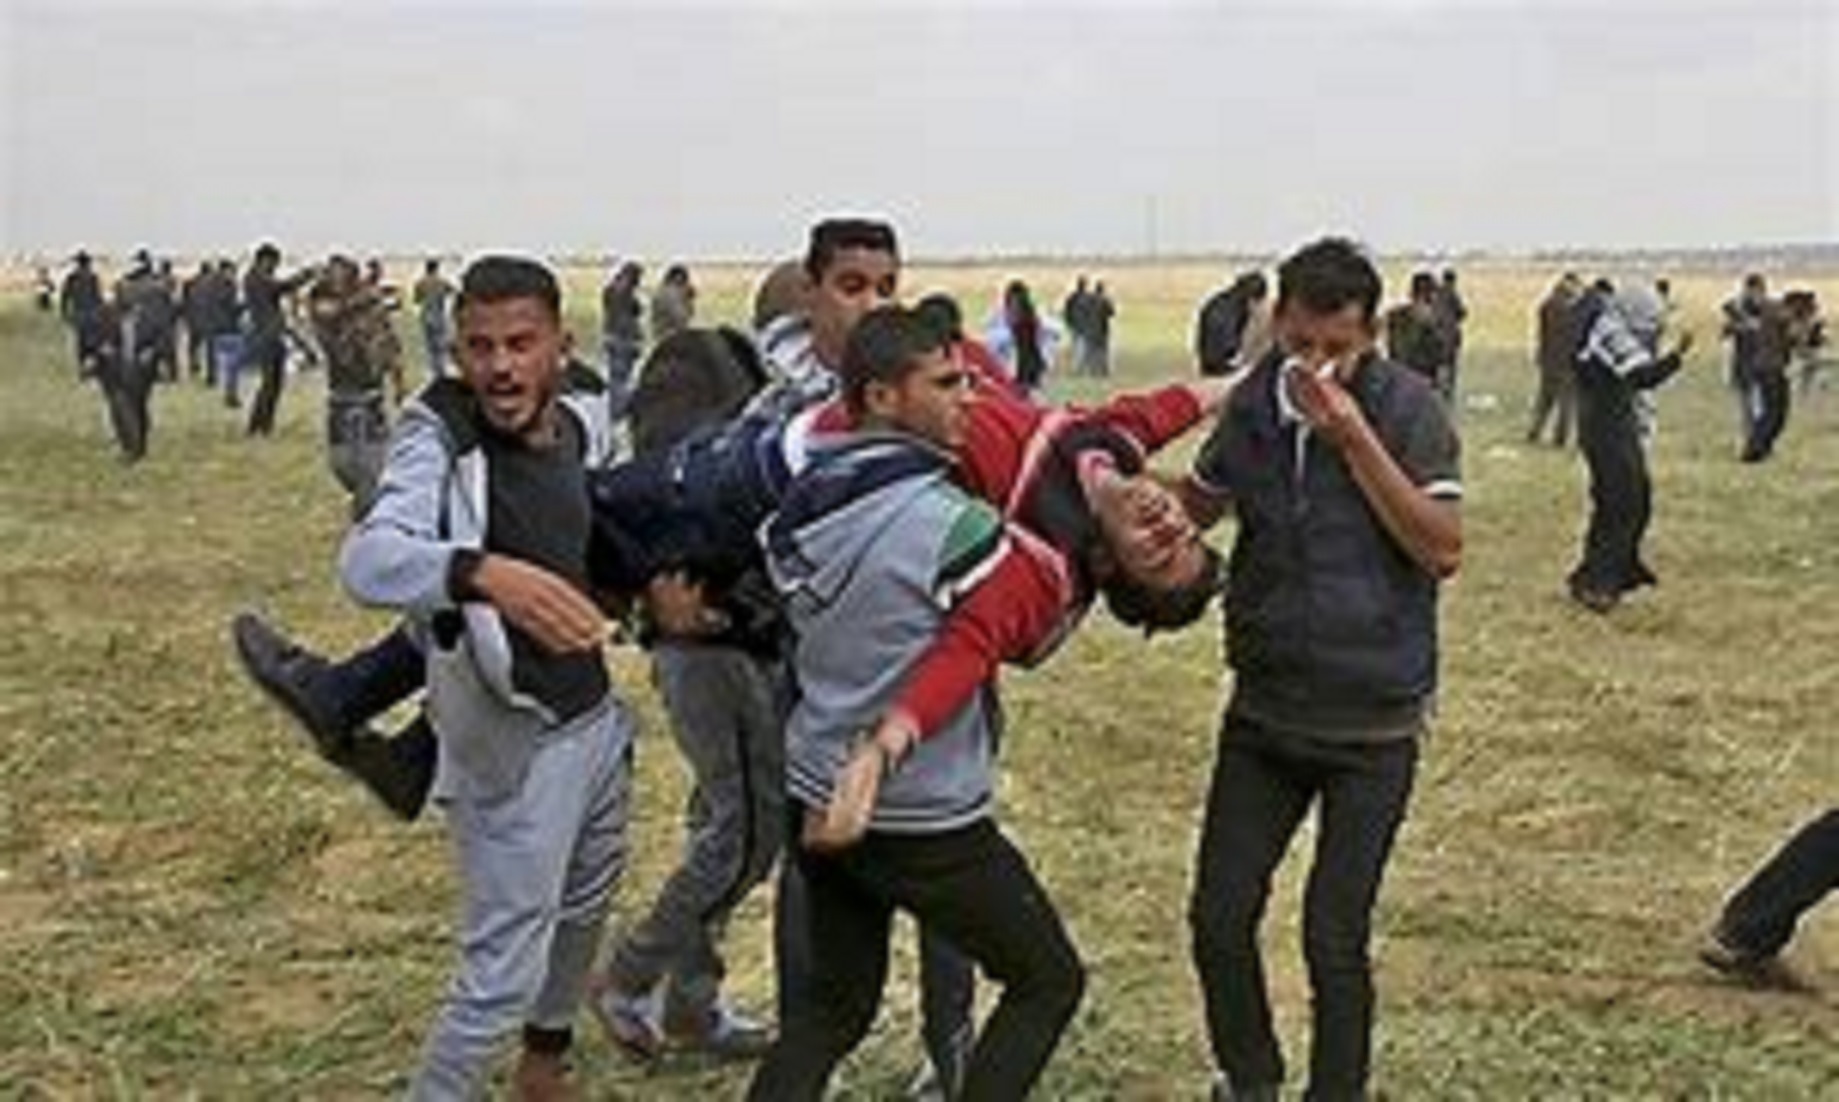 UN Official Calls For Humanitarian Pause In Violence In Israel, Gaza